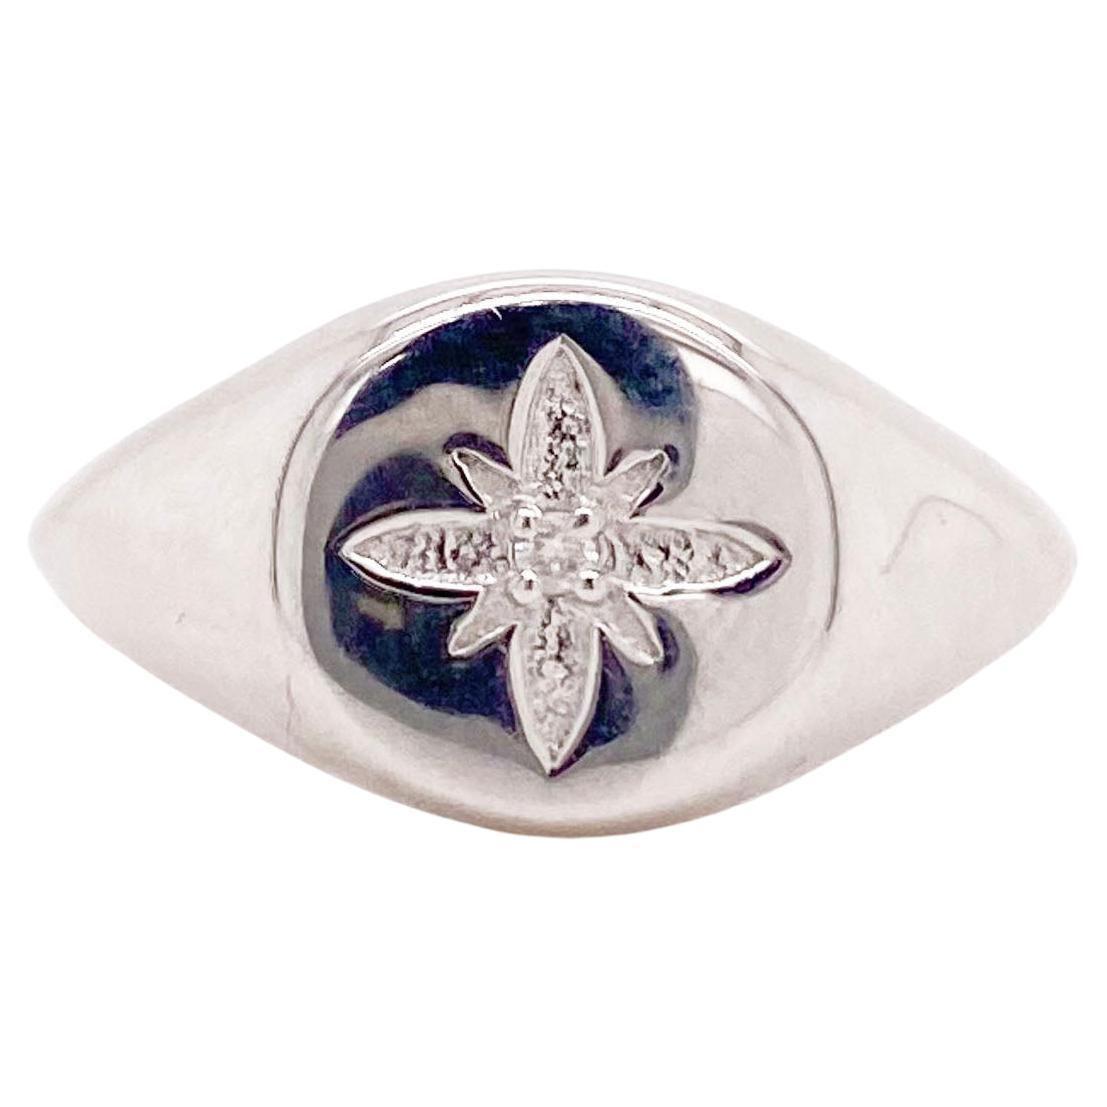 For Sale:  Snowflake Signet Ring, Flower Signet Sterling Silver Ring